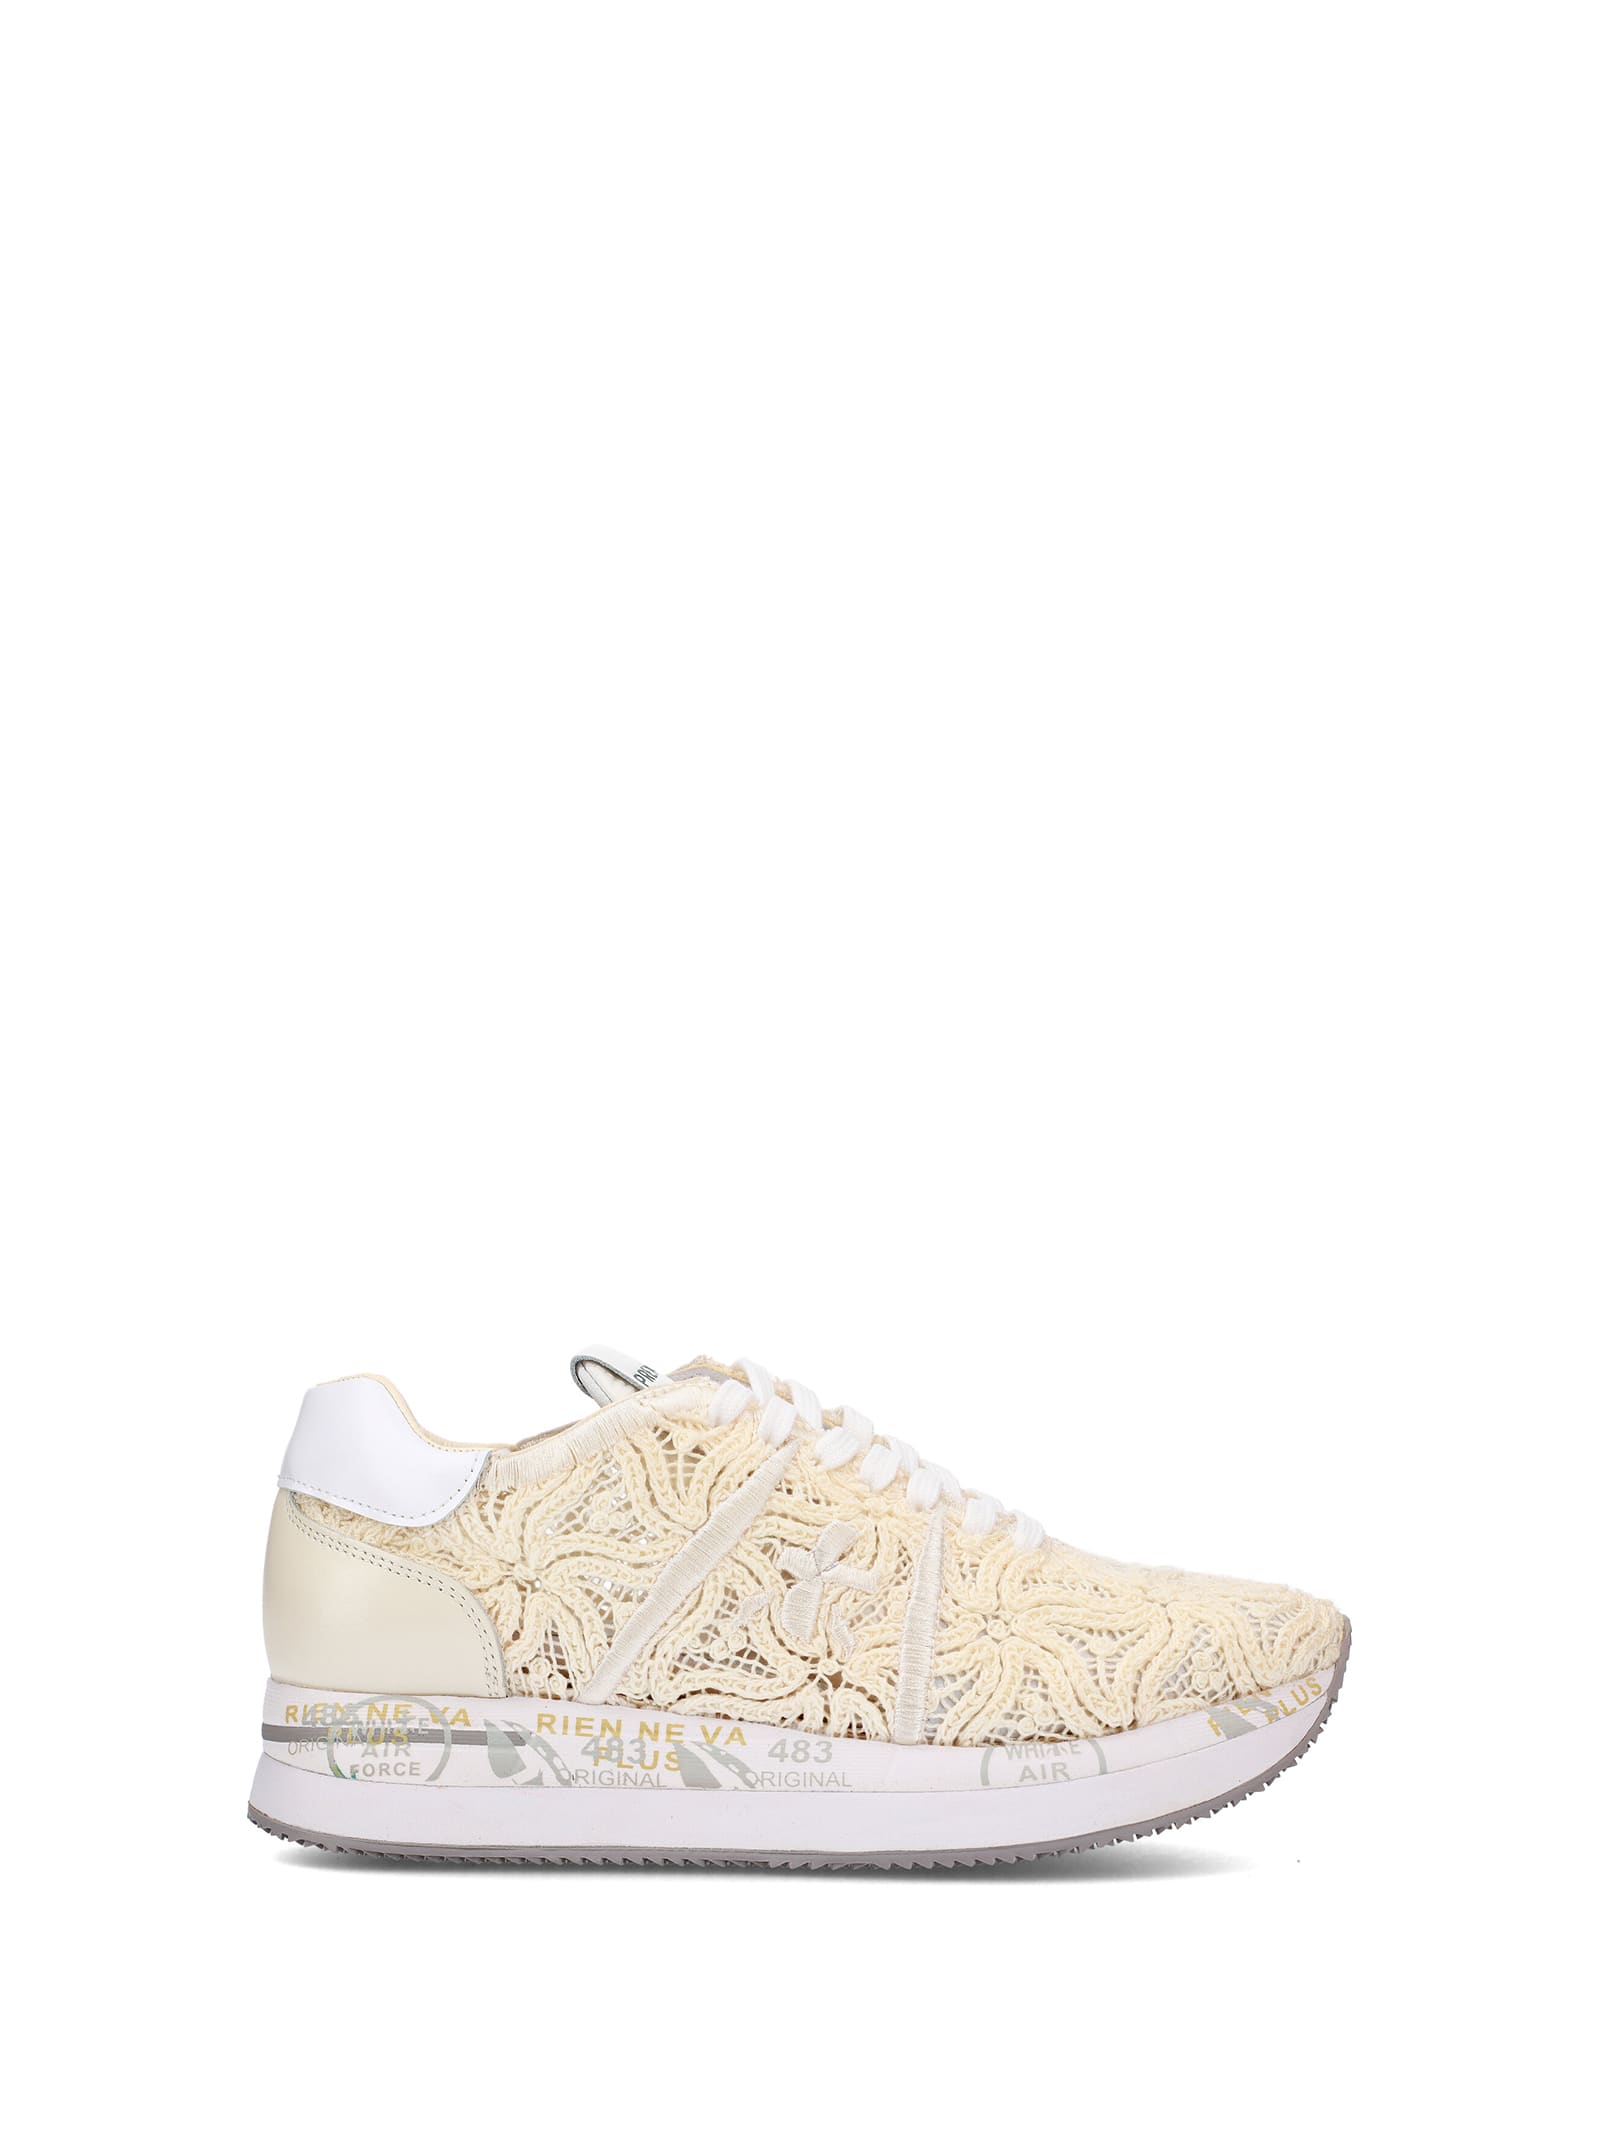 Premiata Conny 6787 Perforated Sneaker In Gold